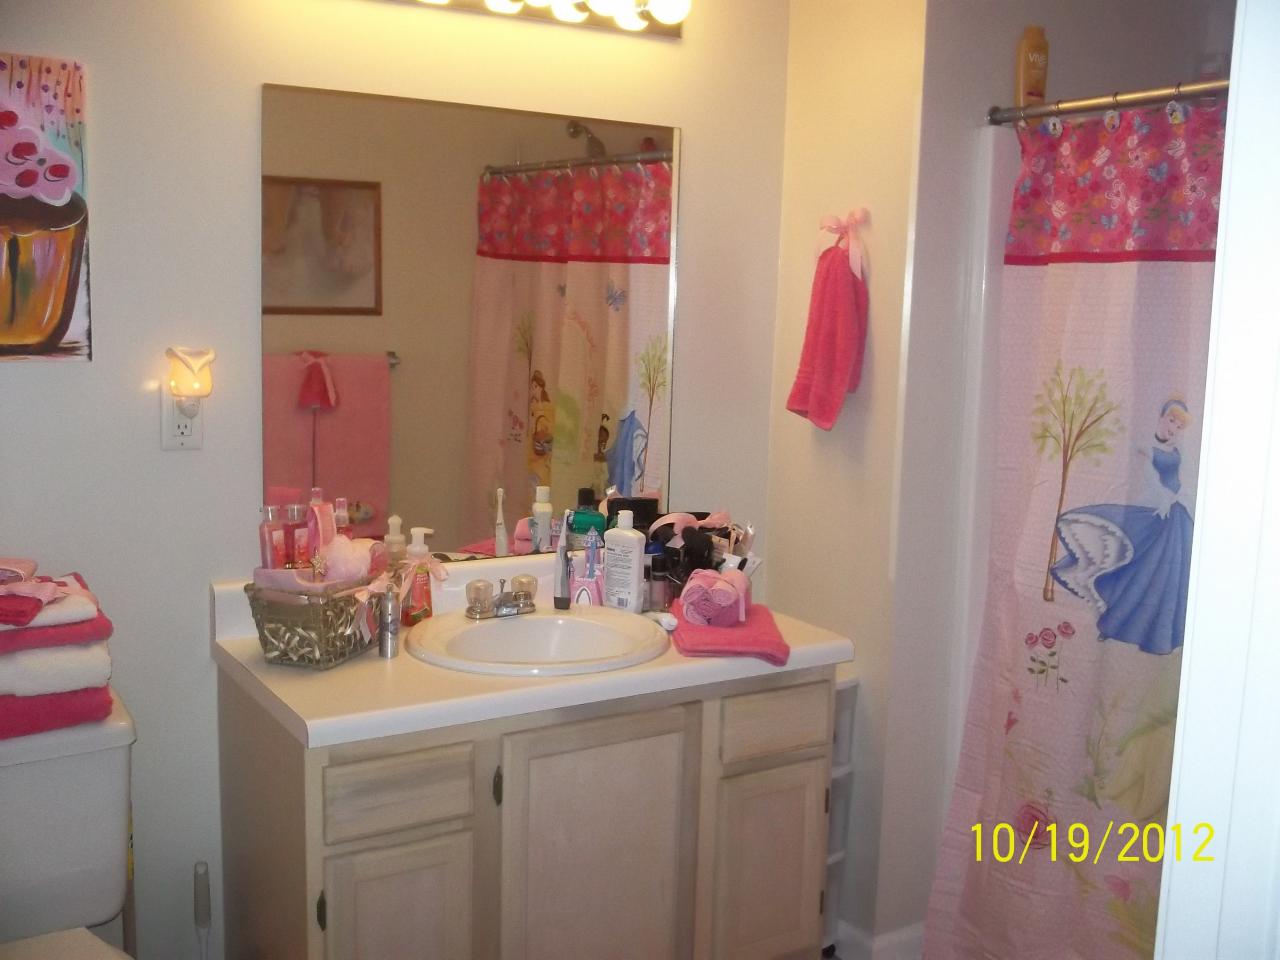 I madeover Lexi's Bathroom with Disney princess and Pink of course